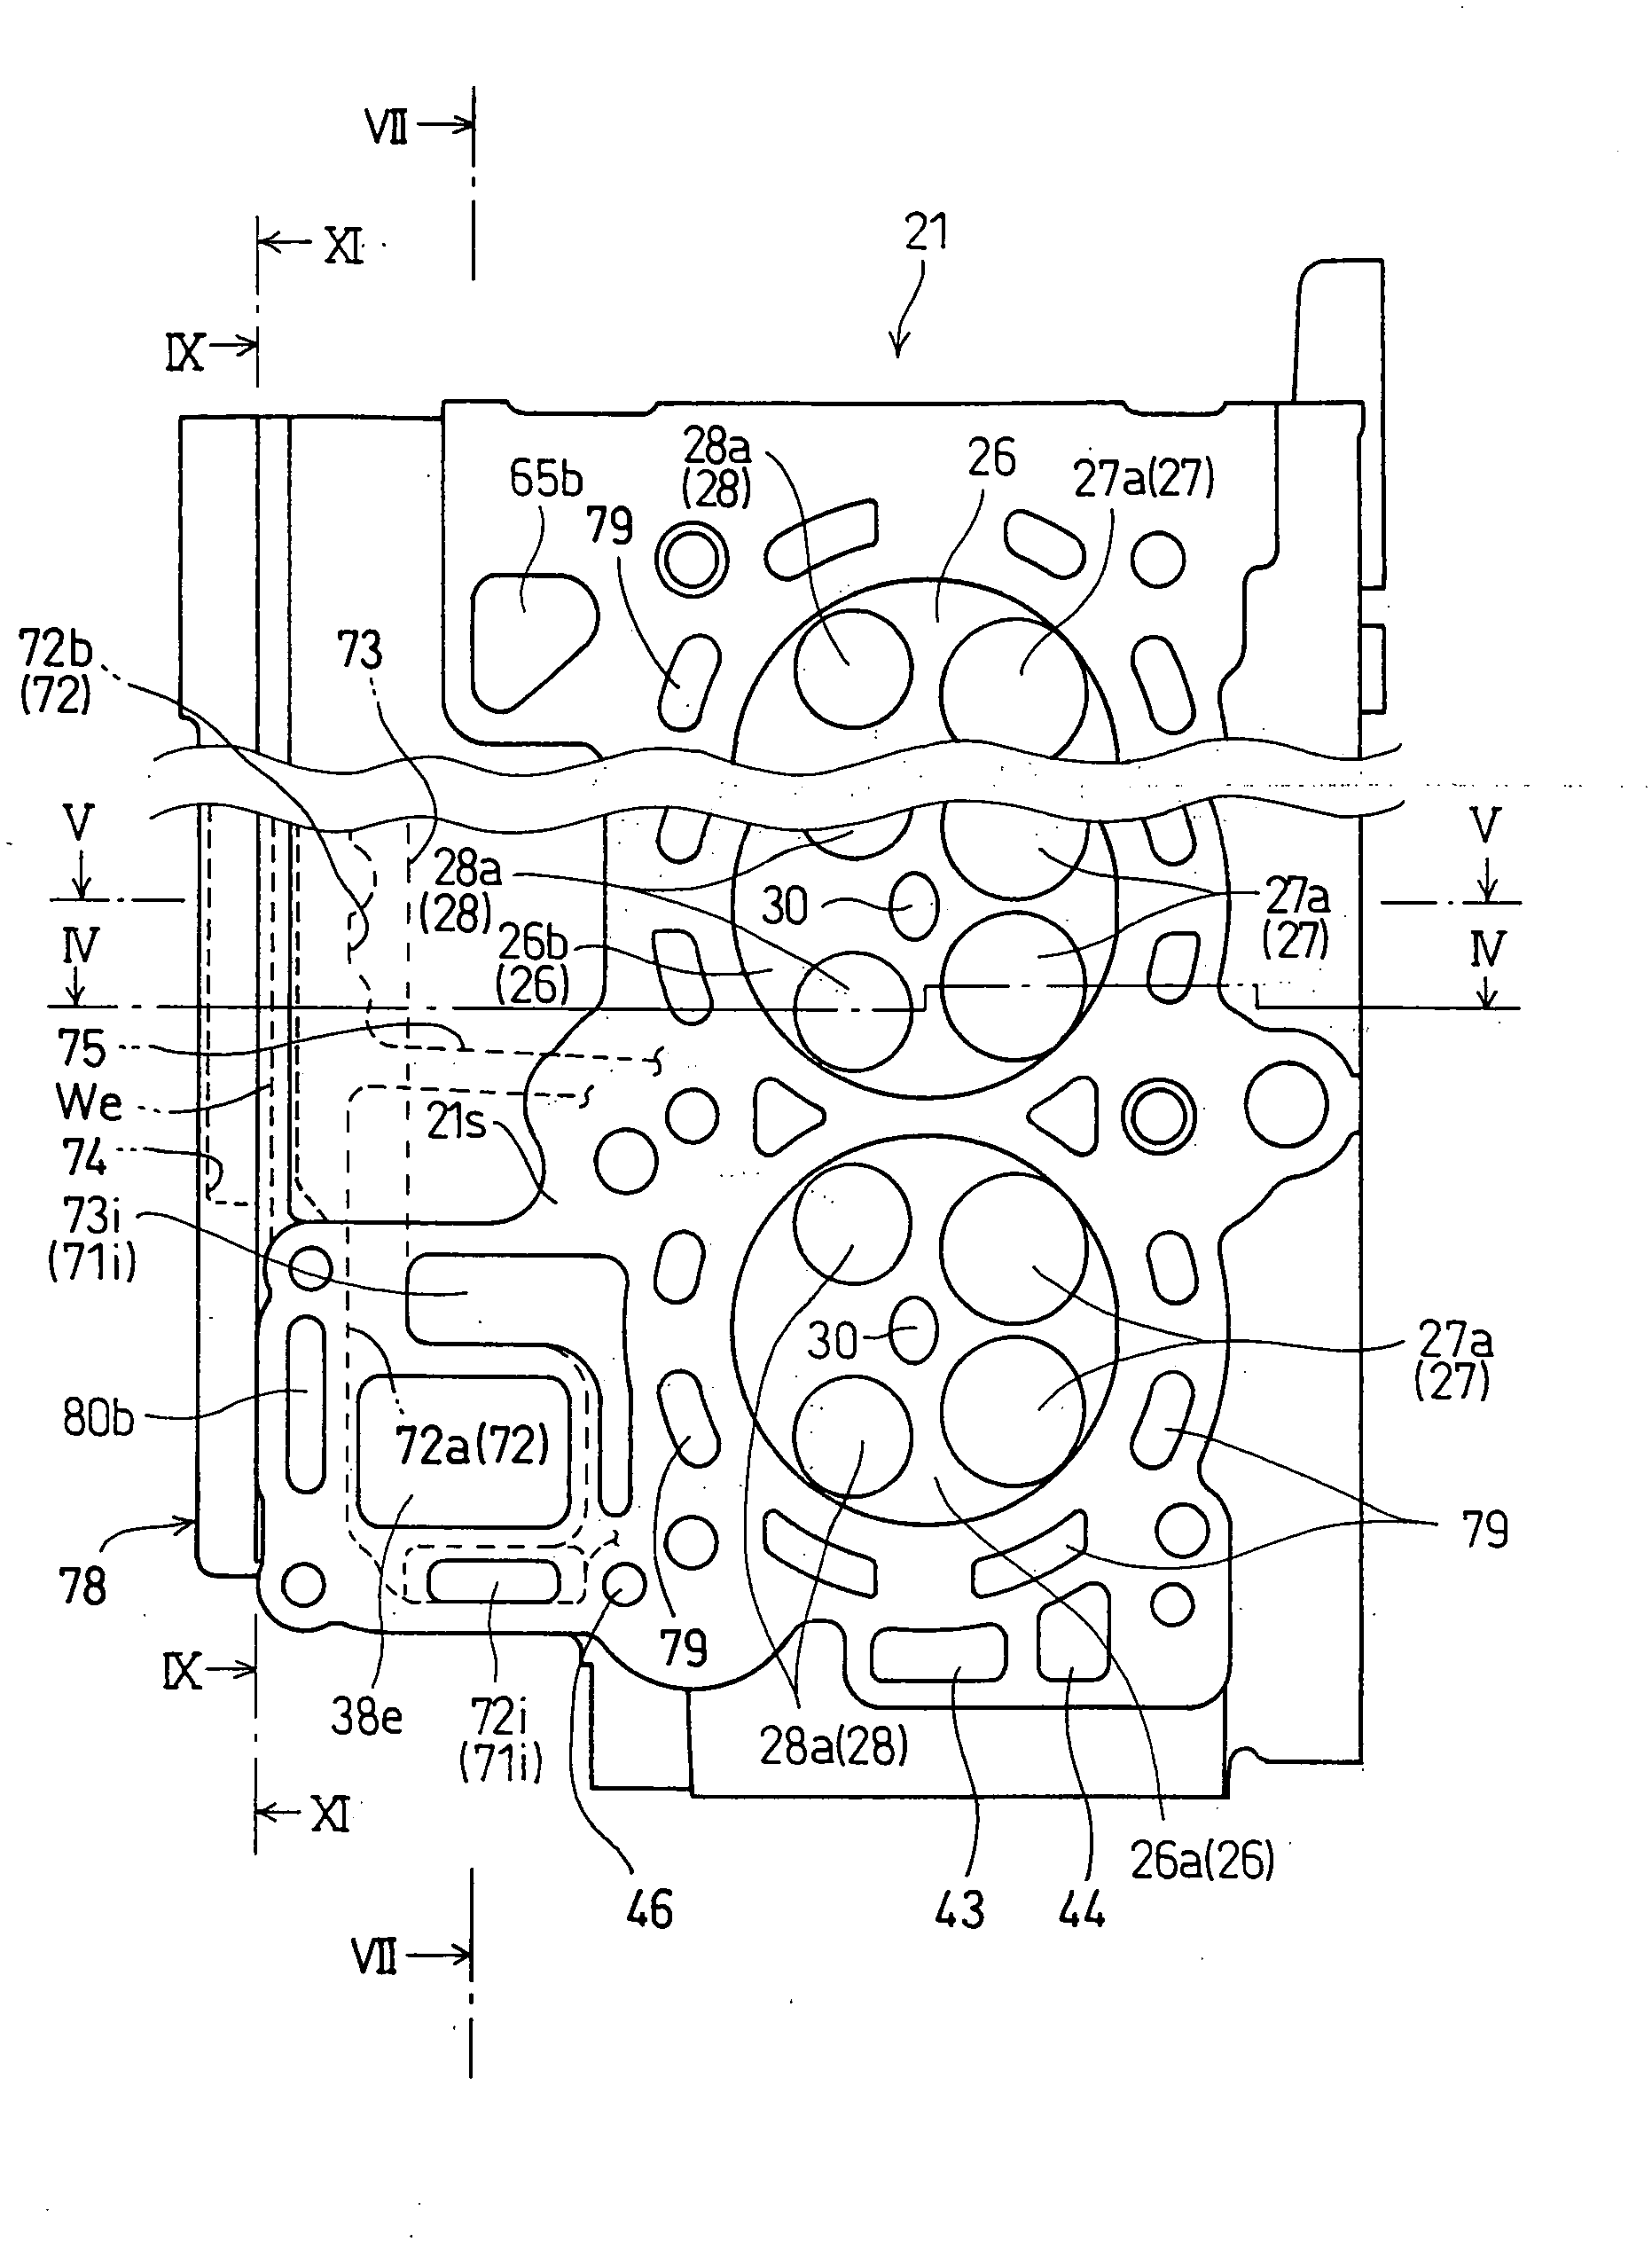 Water-cooled internal combustion engine